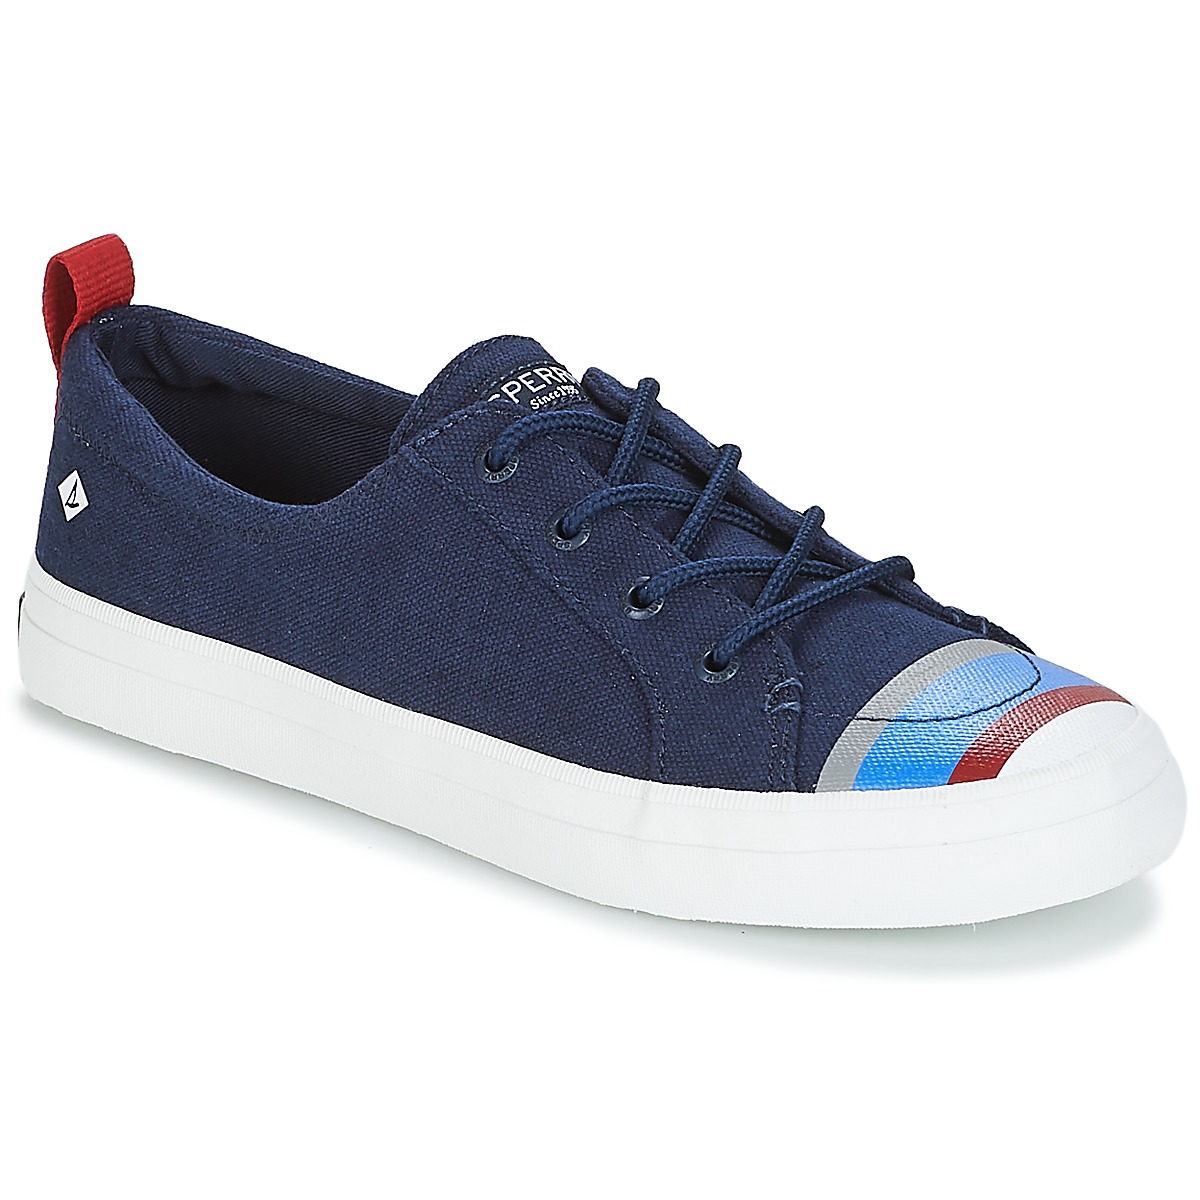 Xαμηλά Sneakers Sperry Top-Sider CREST VIBE BUOY STRIPE Ύφασμα